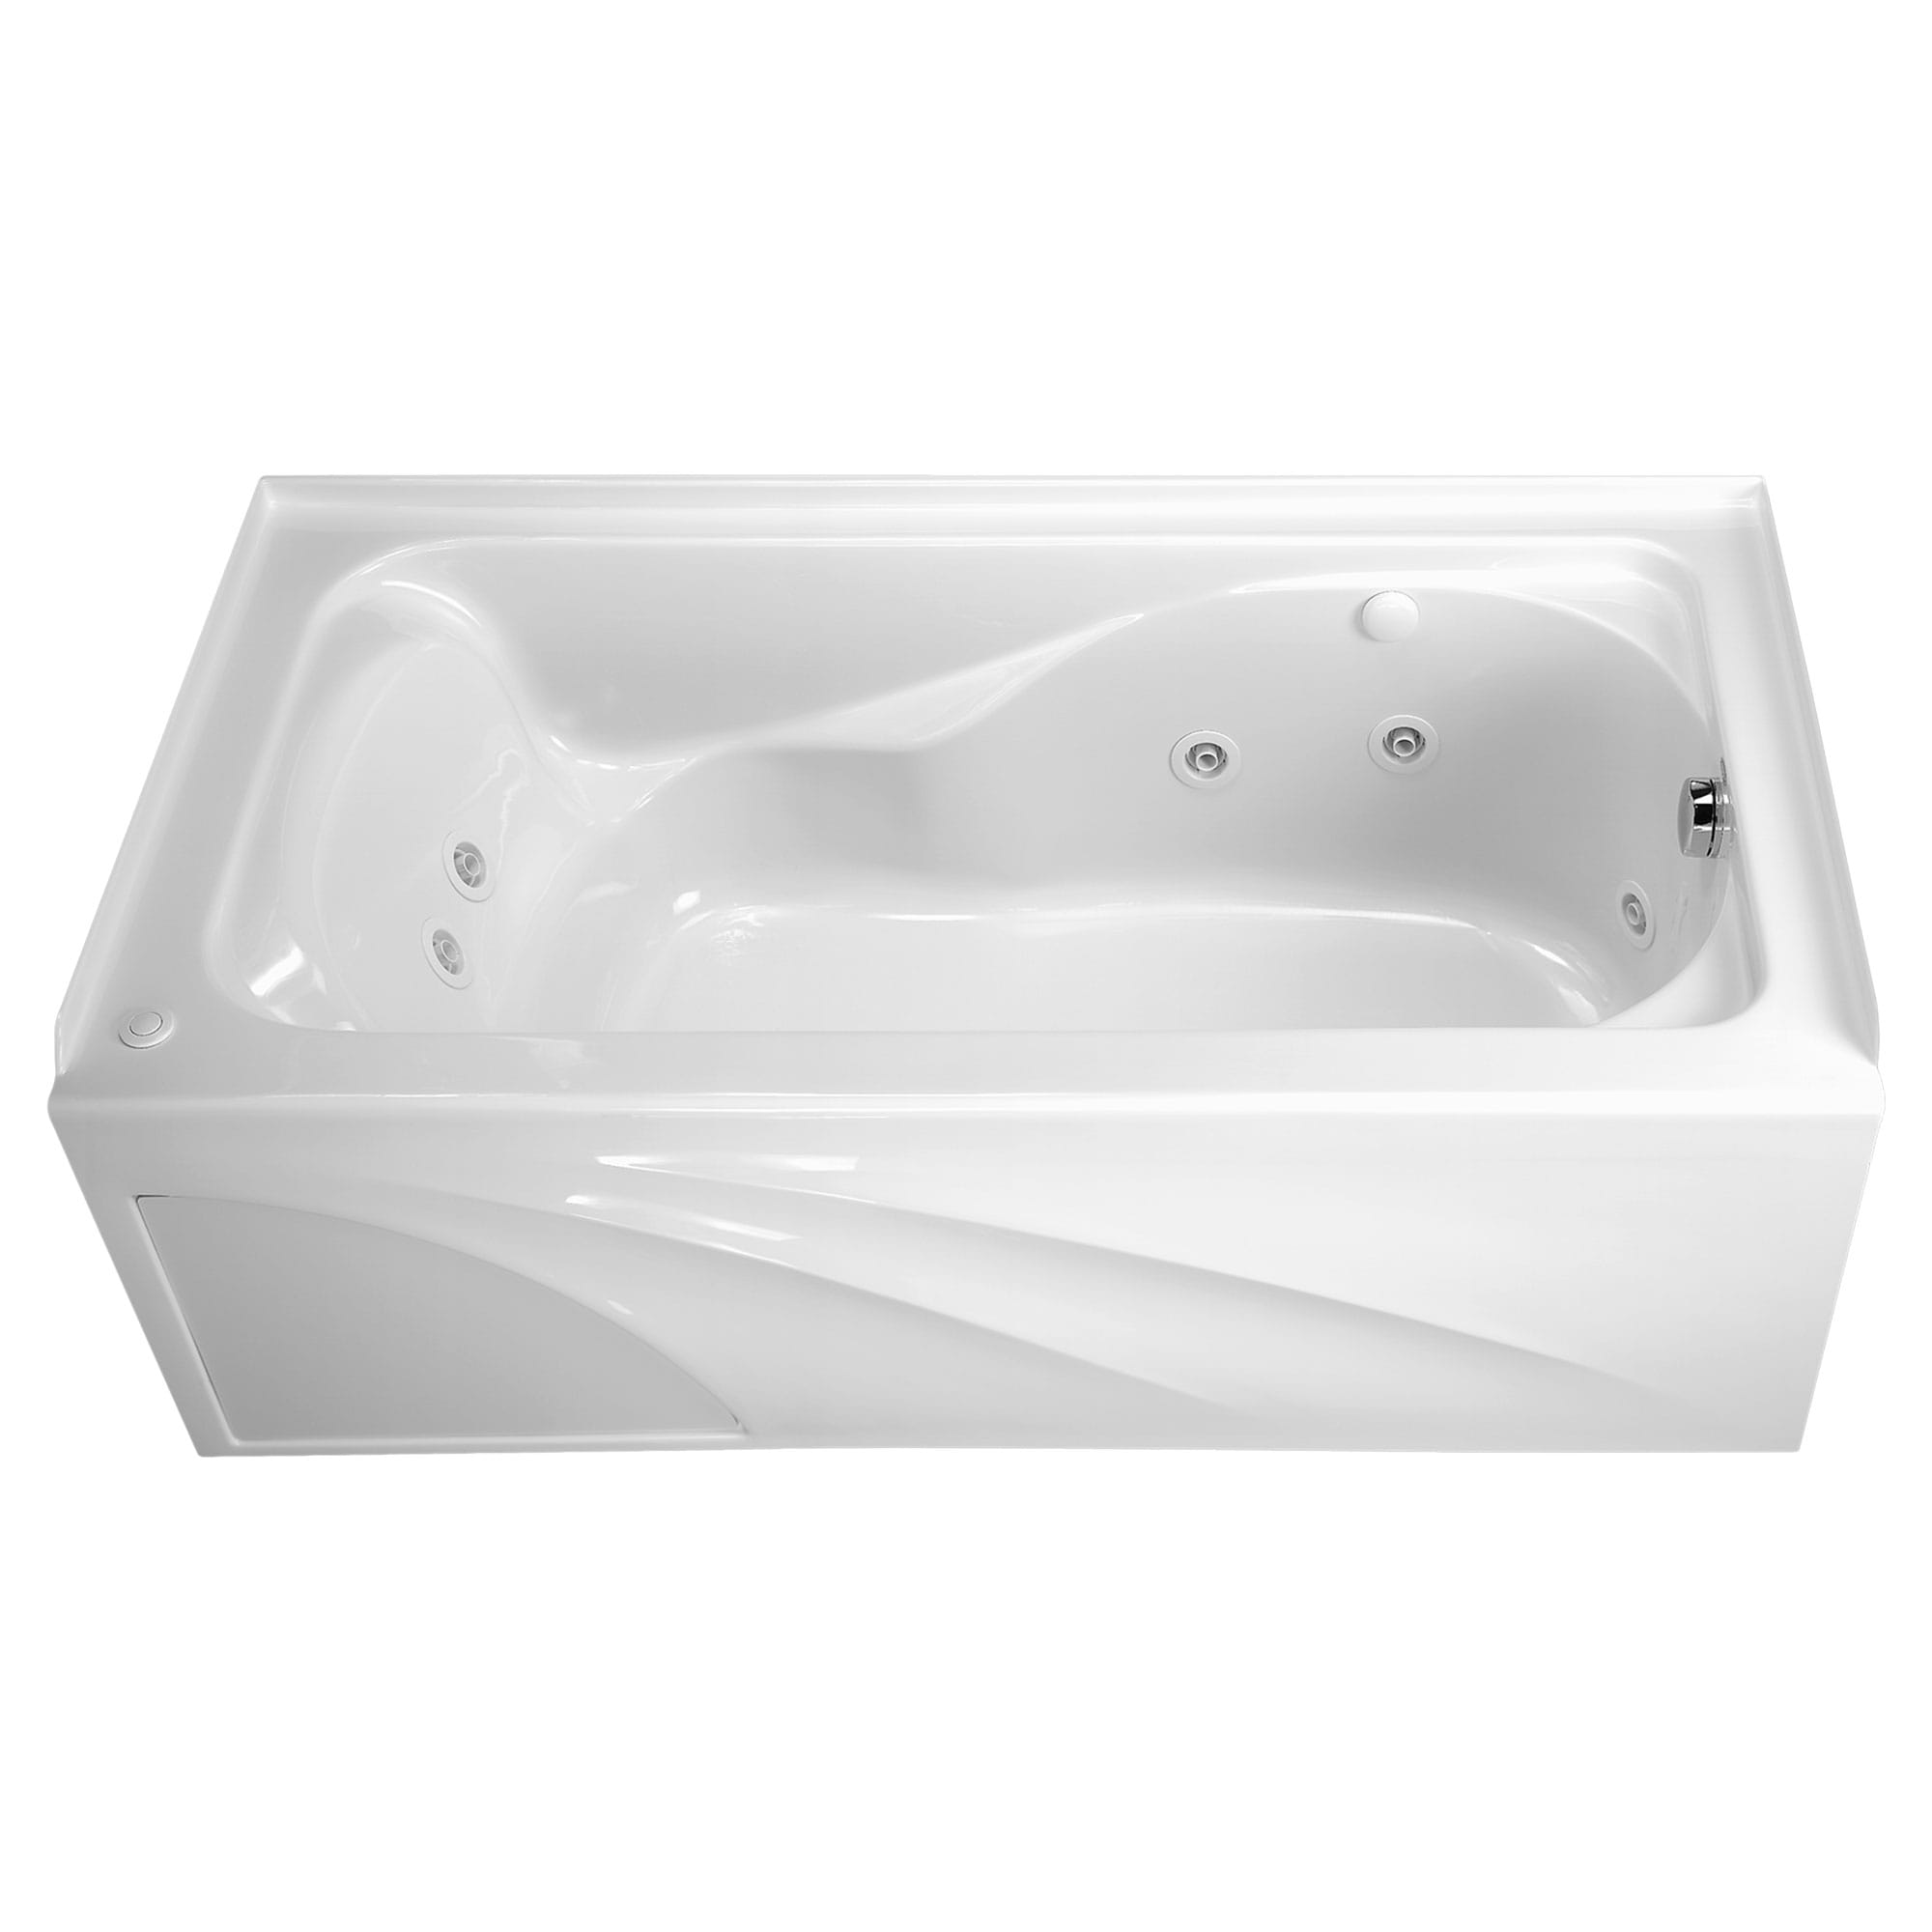 Cadet 60 x 32 Inch Integral Apron Bathtub Right Hand Outlet With Hydromassage System WHITE